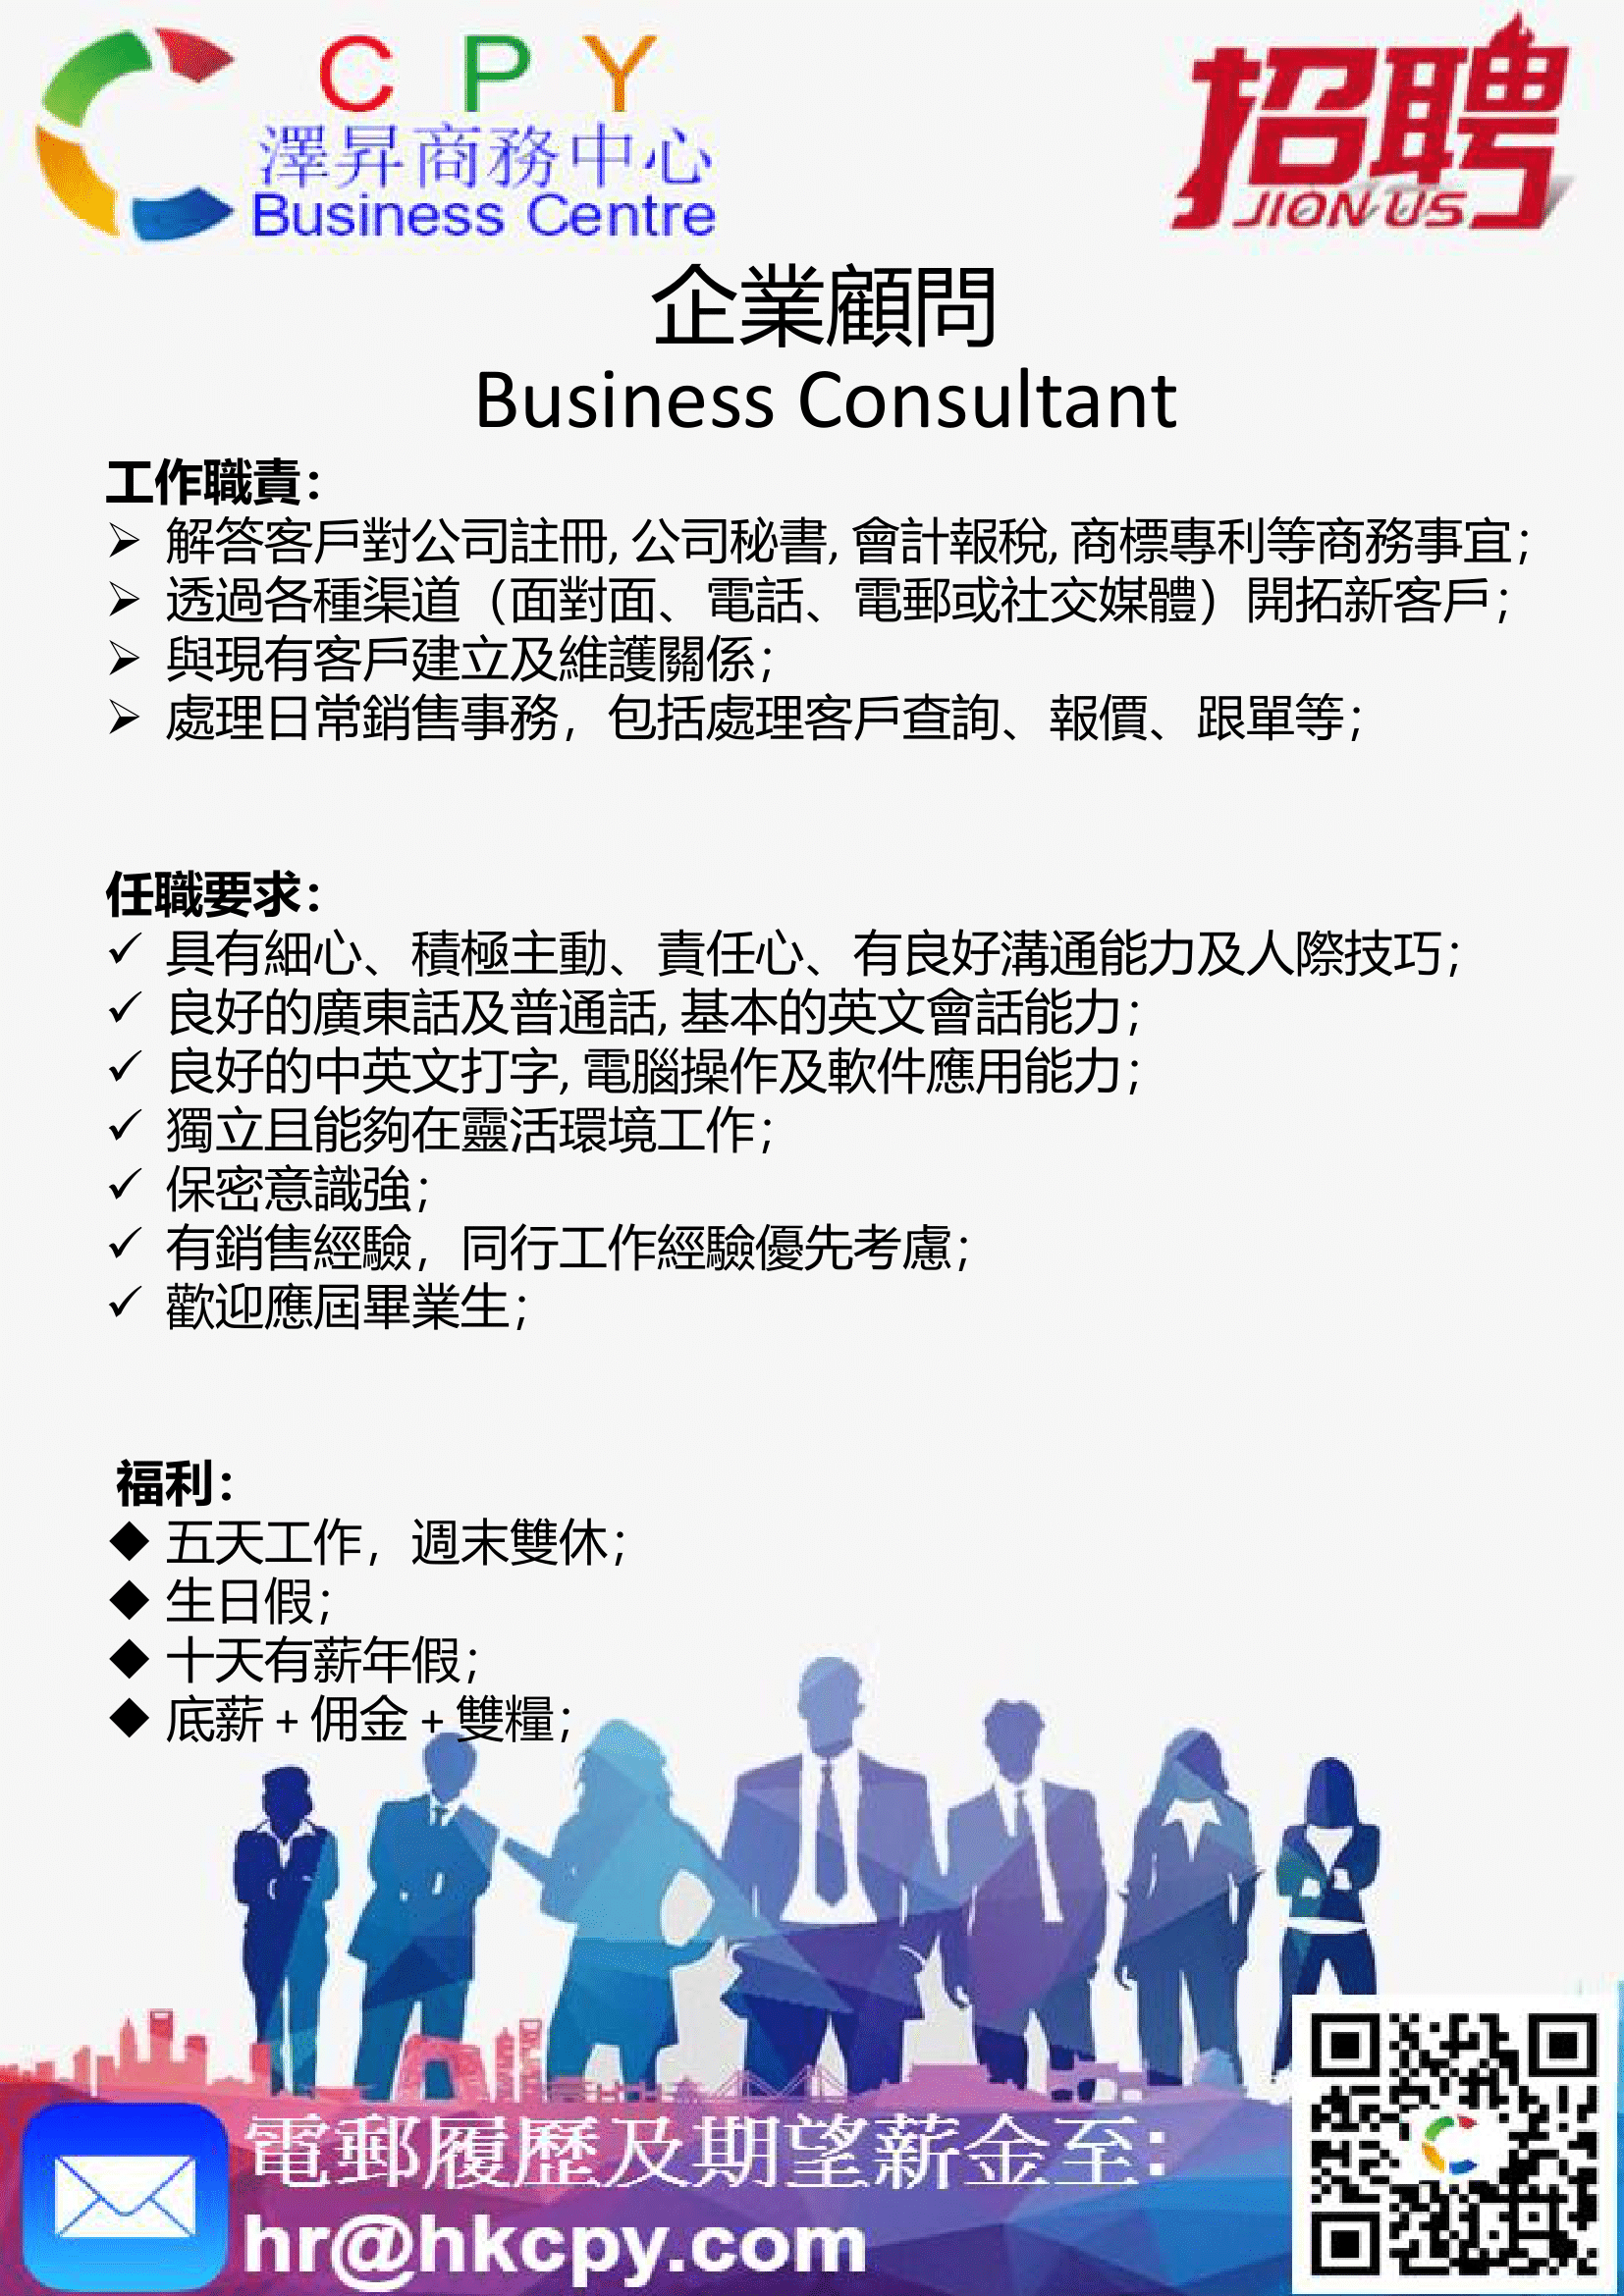 Join Us - Business Consultant 企業顧問